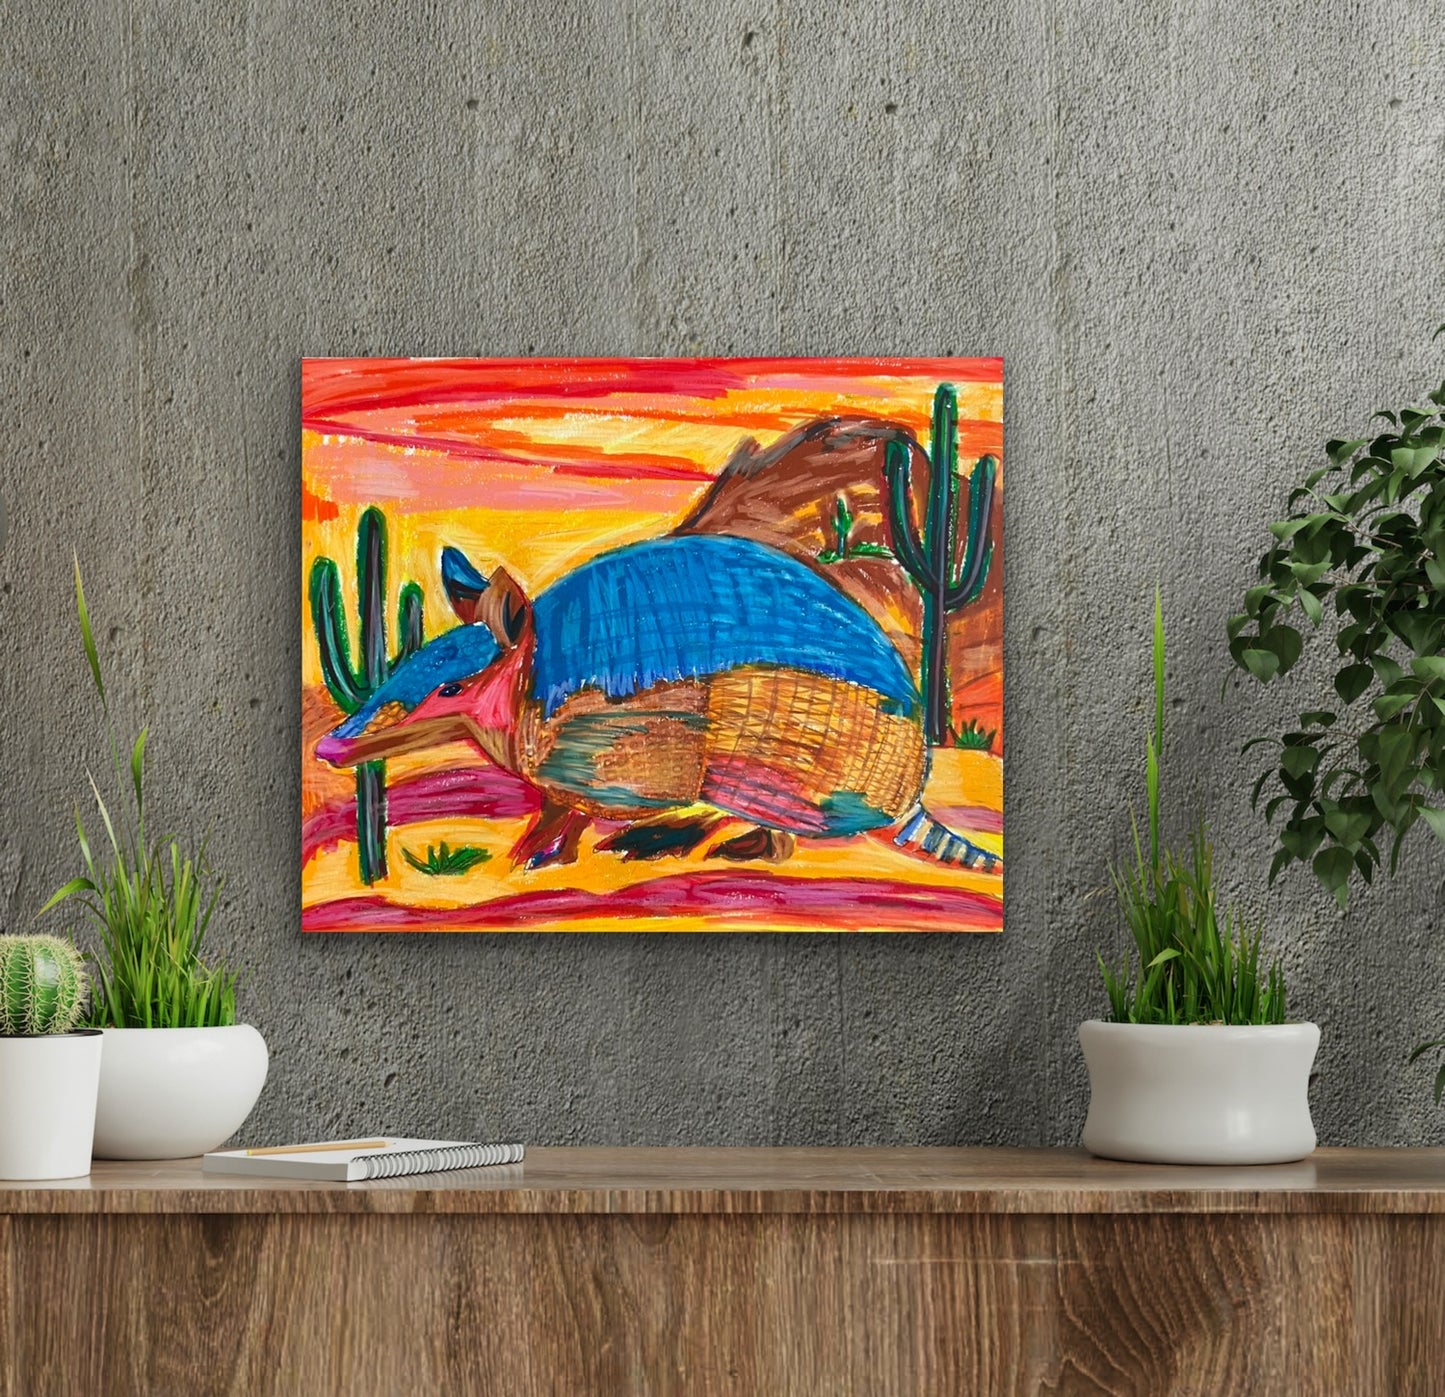 Desert Armadillo - Stretched Canvas Print in more sizes